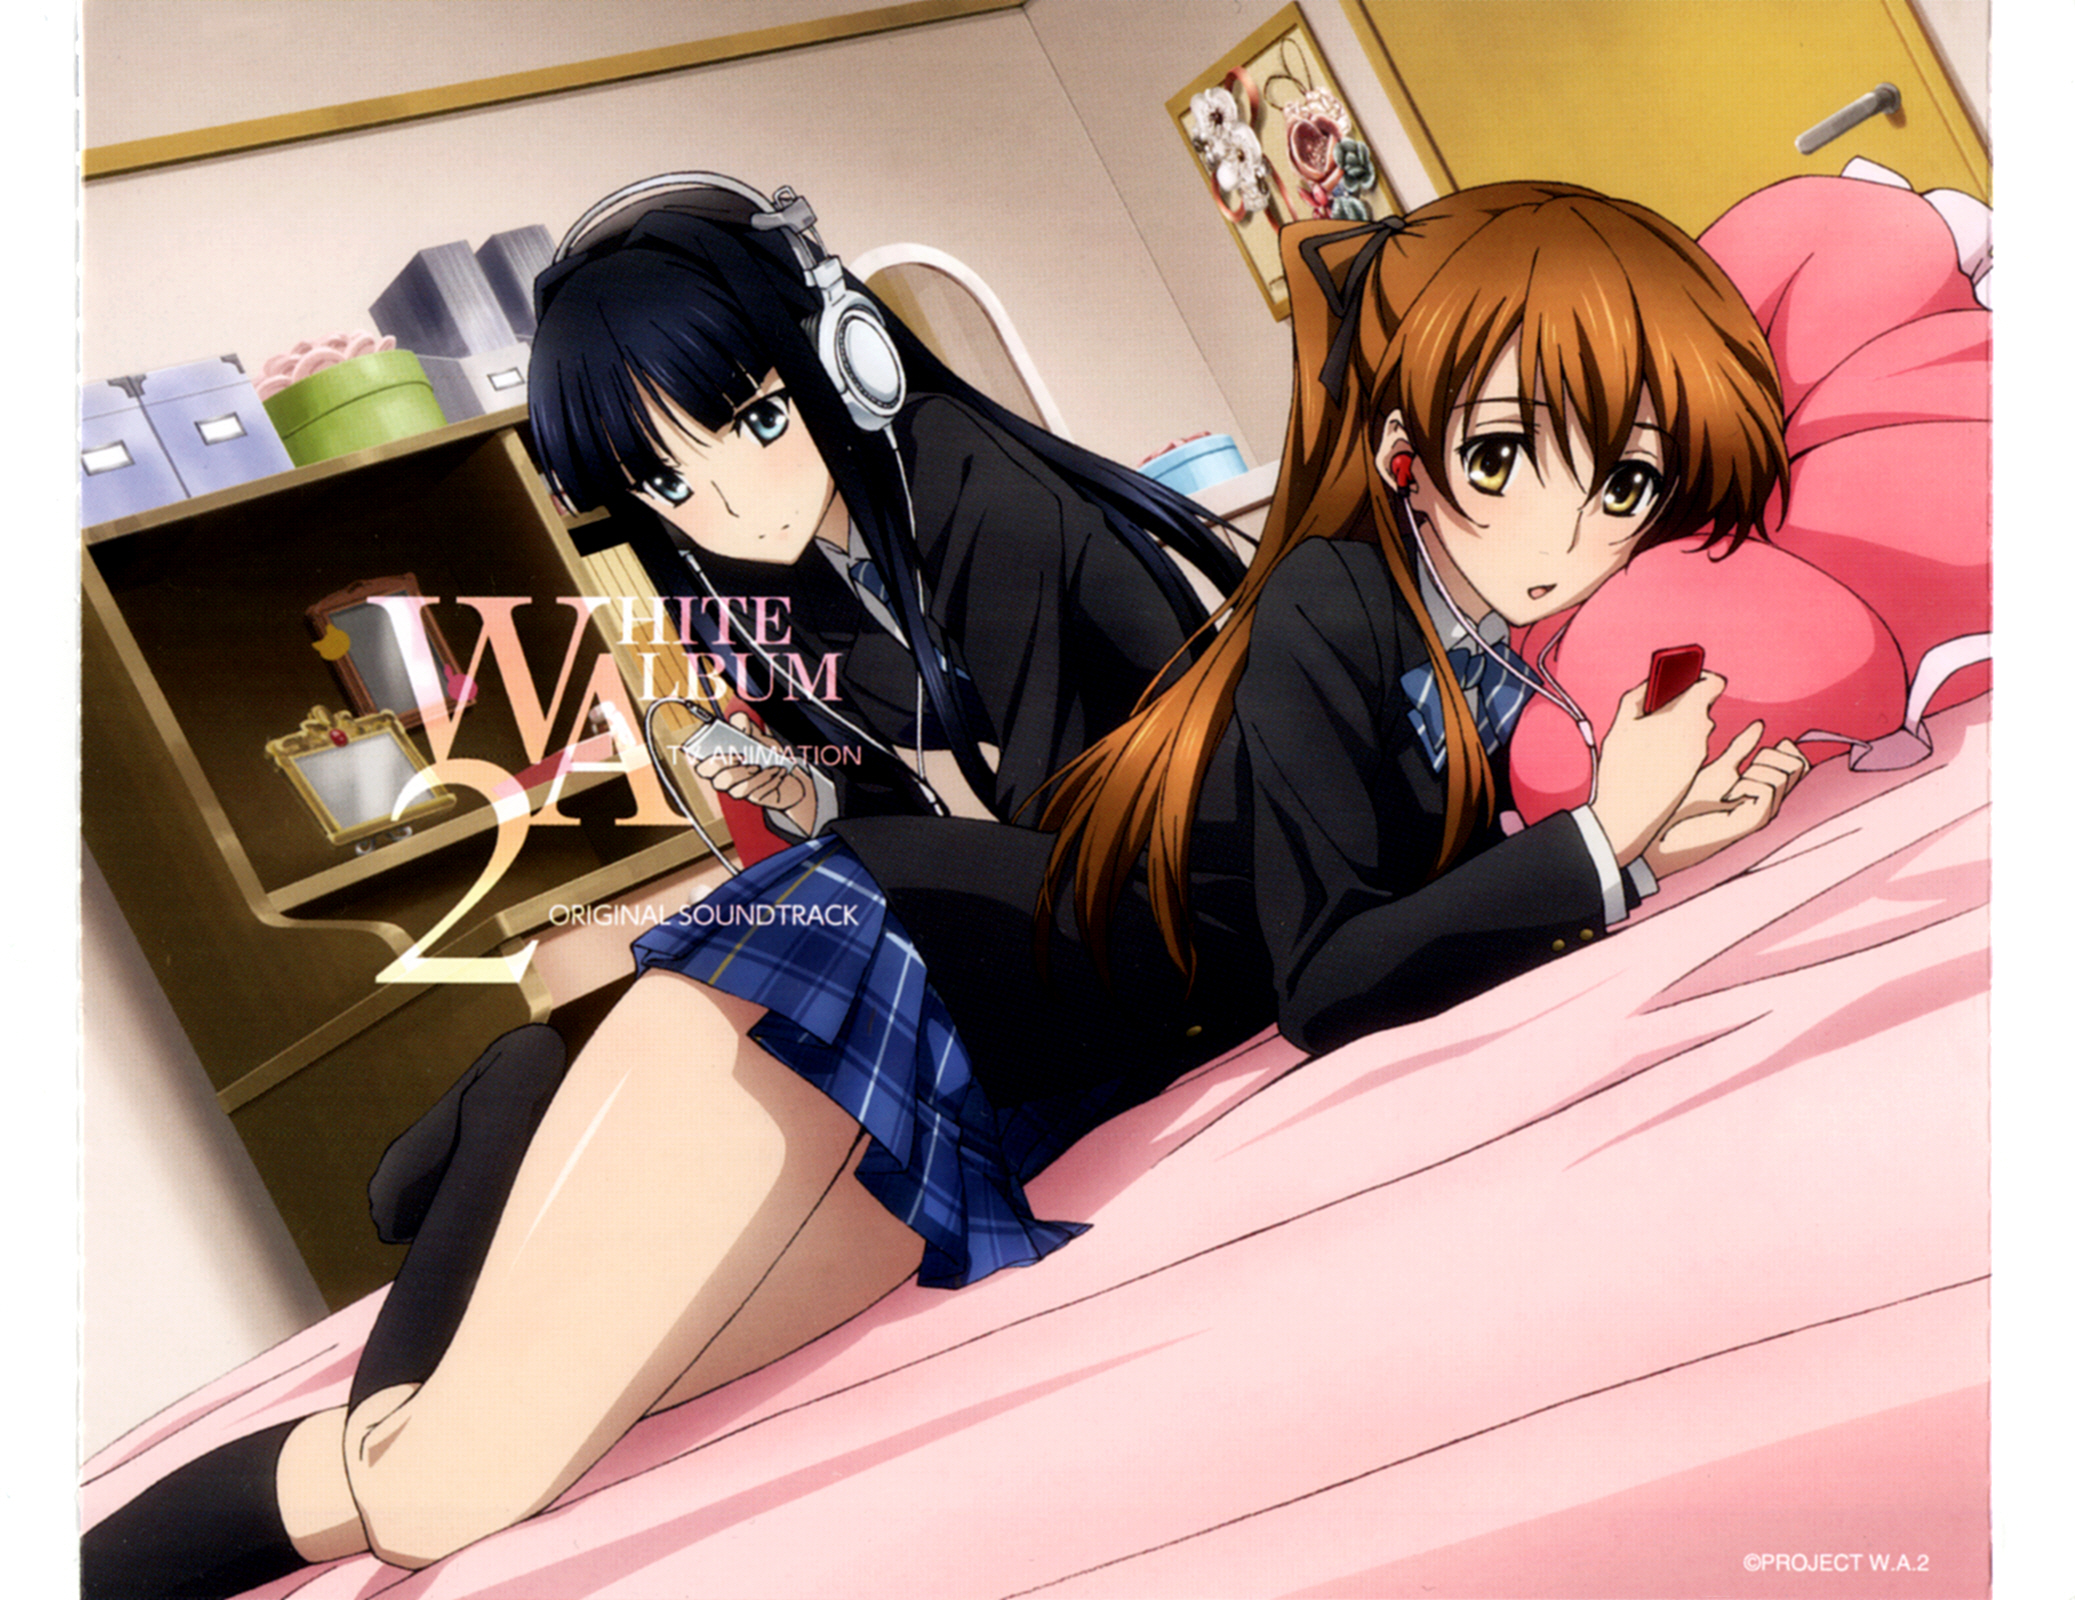 Nice Images Collection: White Album 2 Desktop Wallpapers